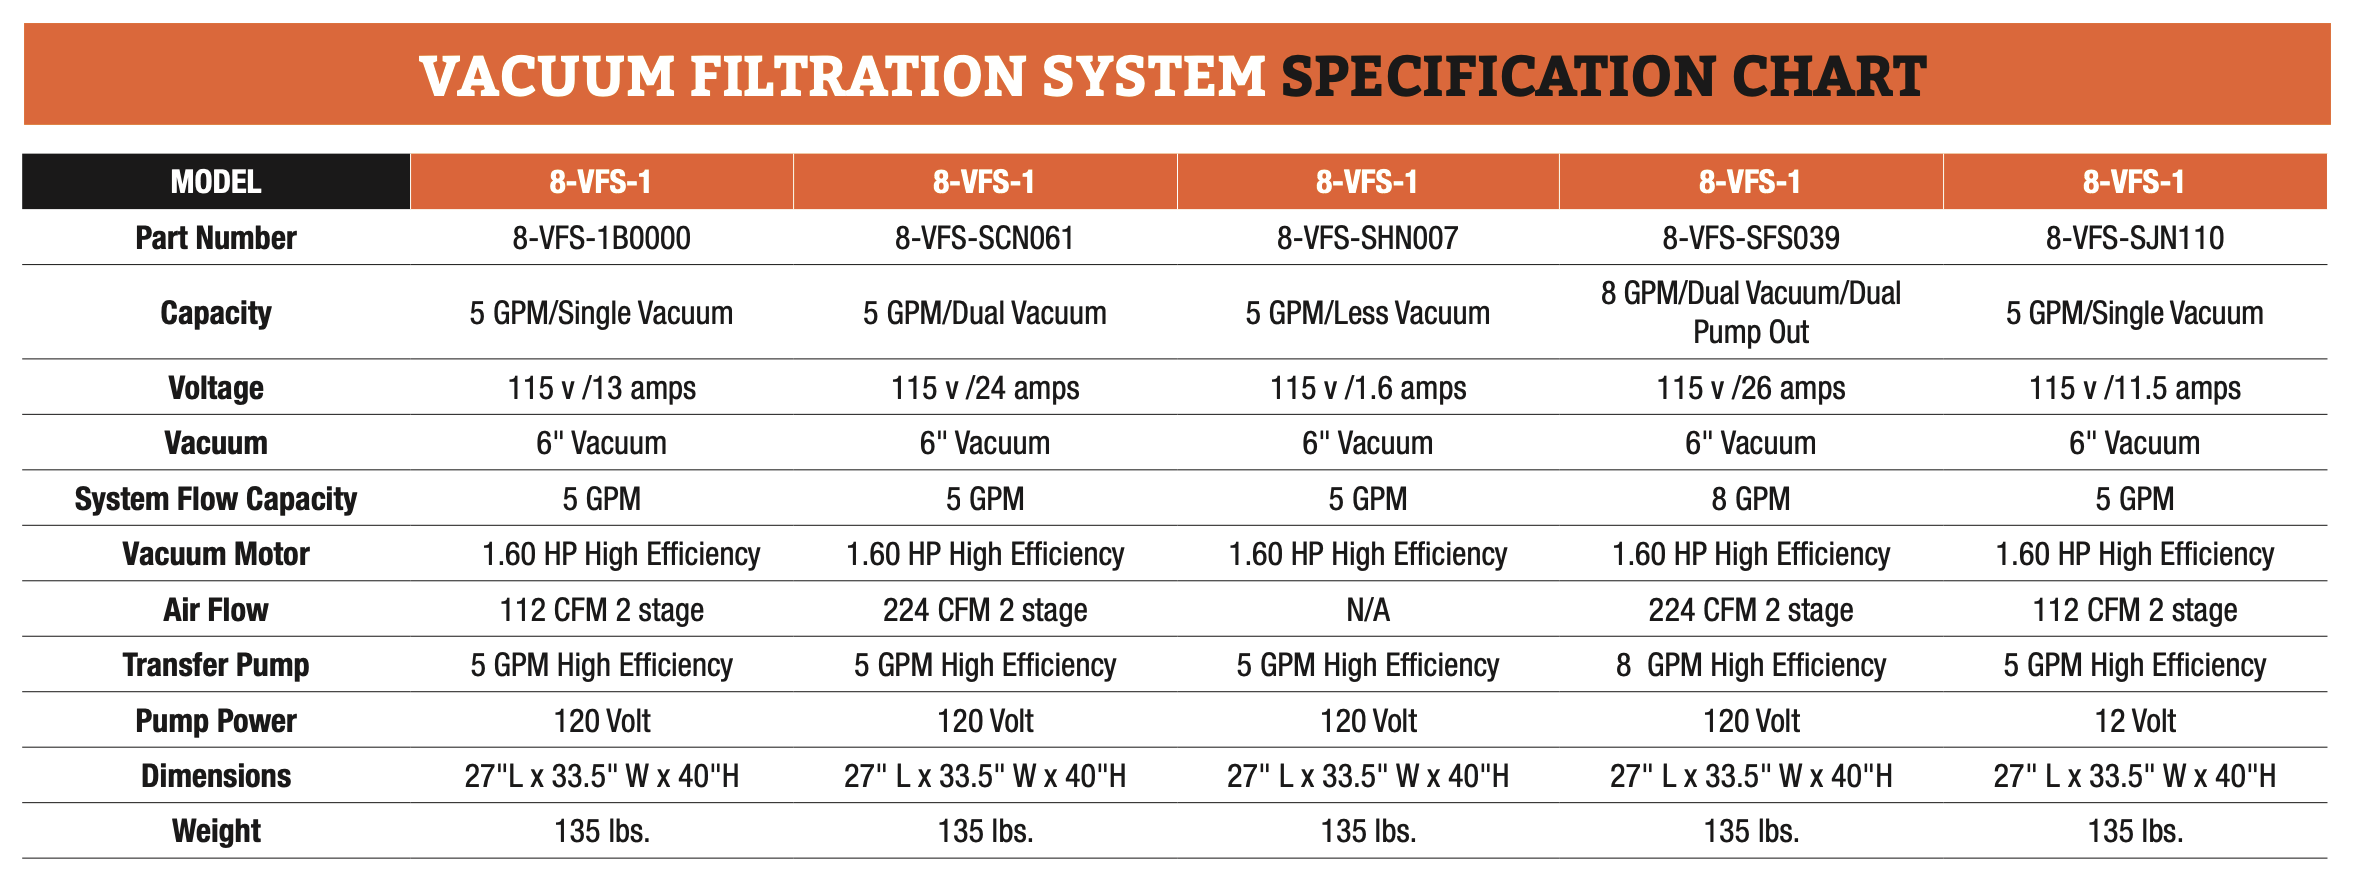 vacuum filtration system specification chart